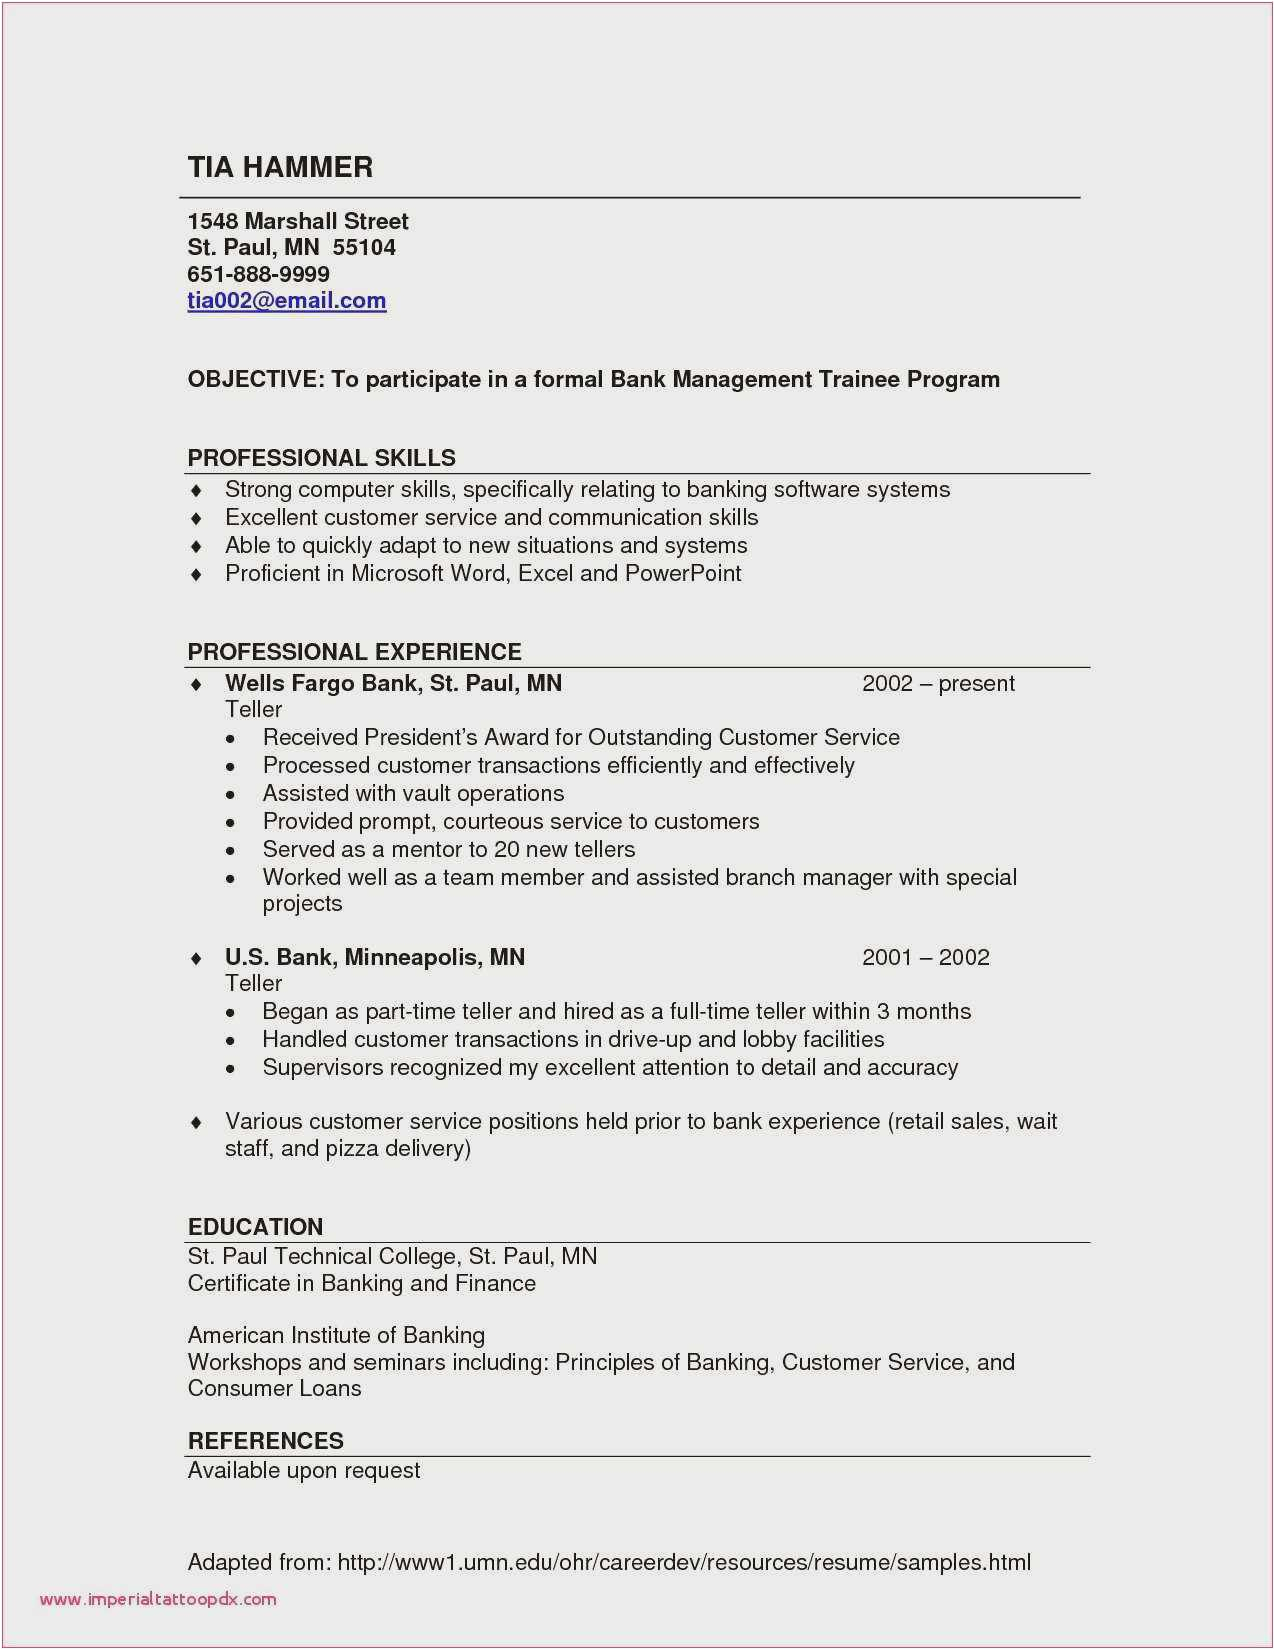 Resume Template References Available Upon Request Free 60 Resume References Template Model